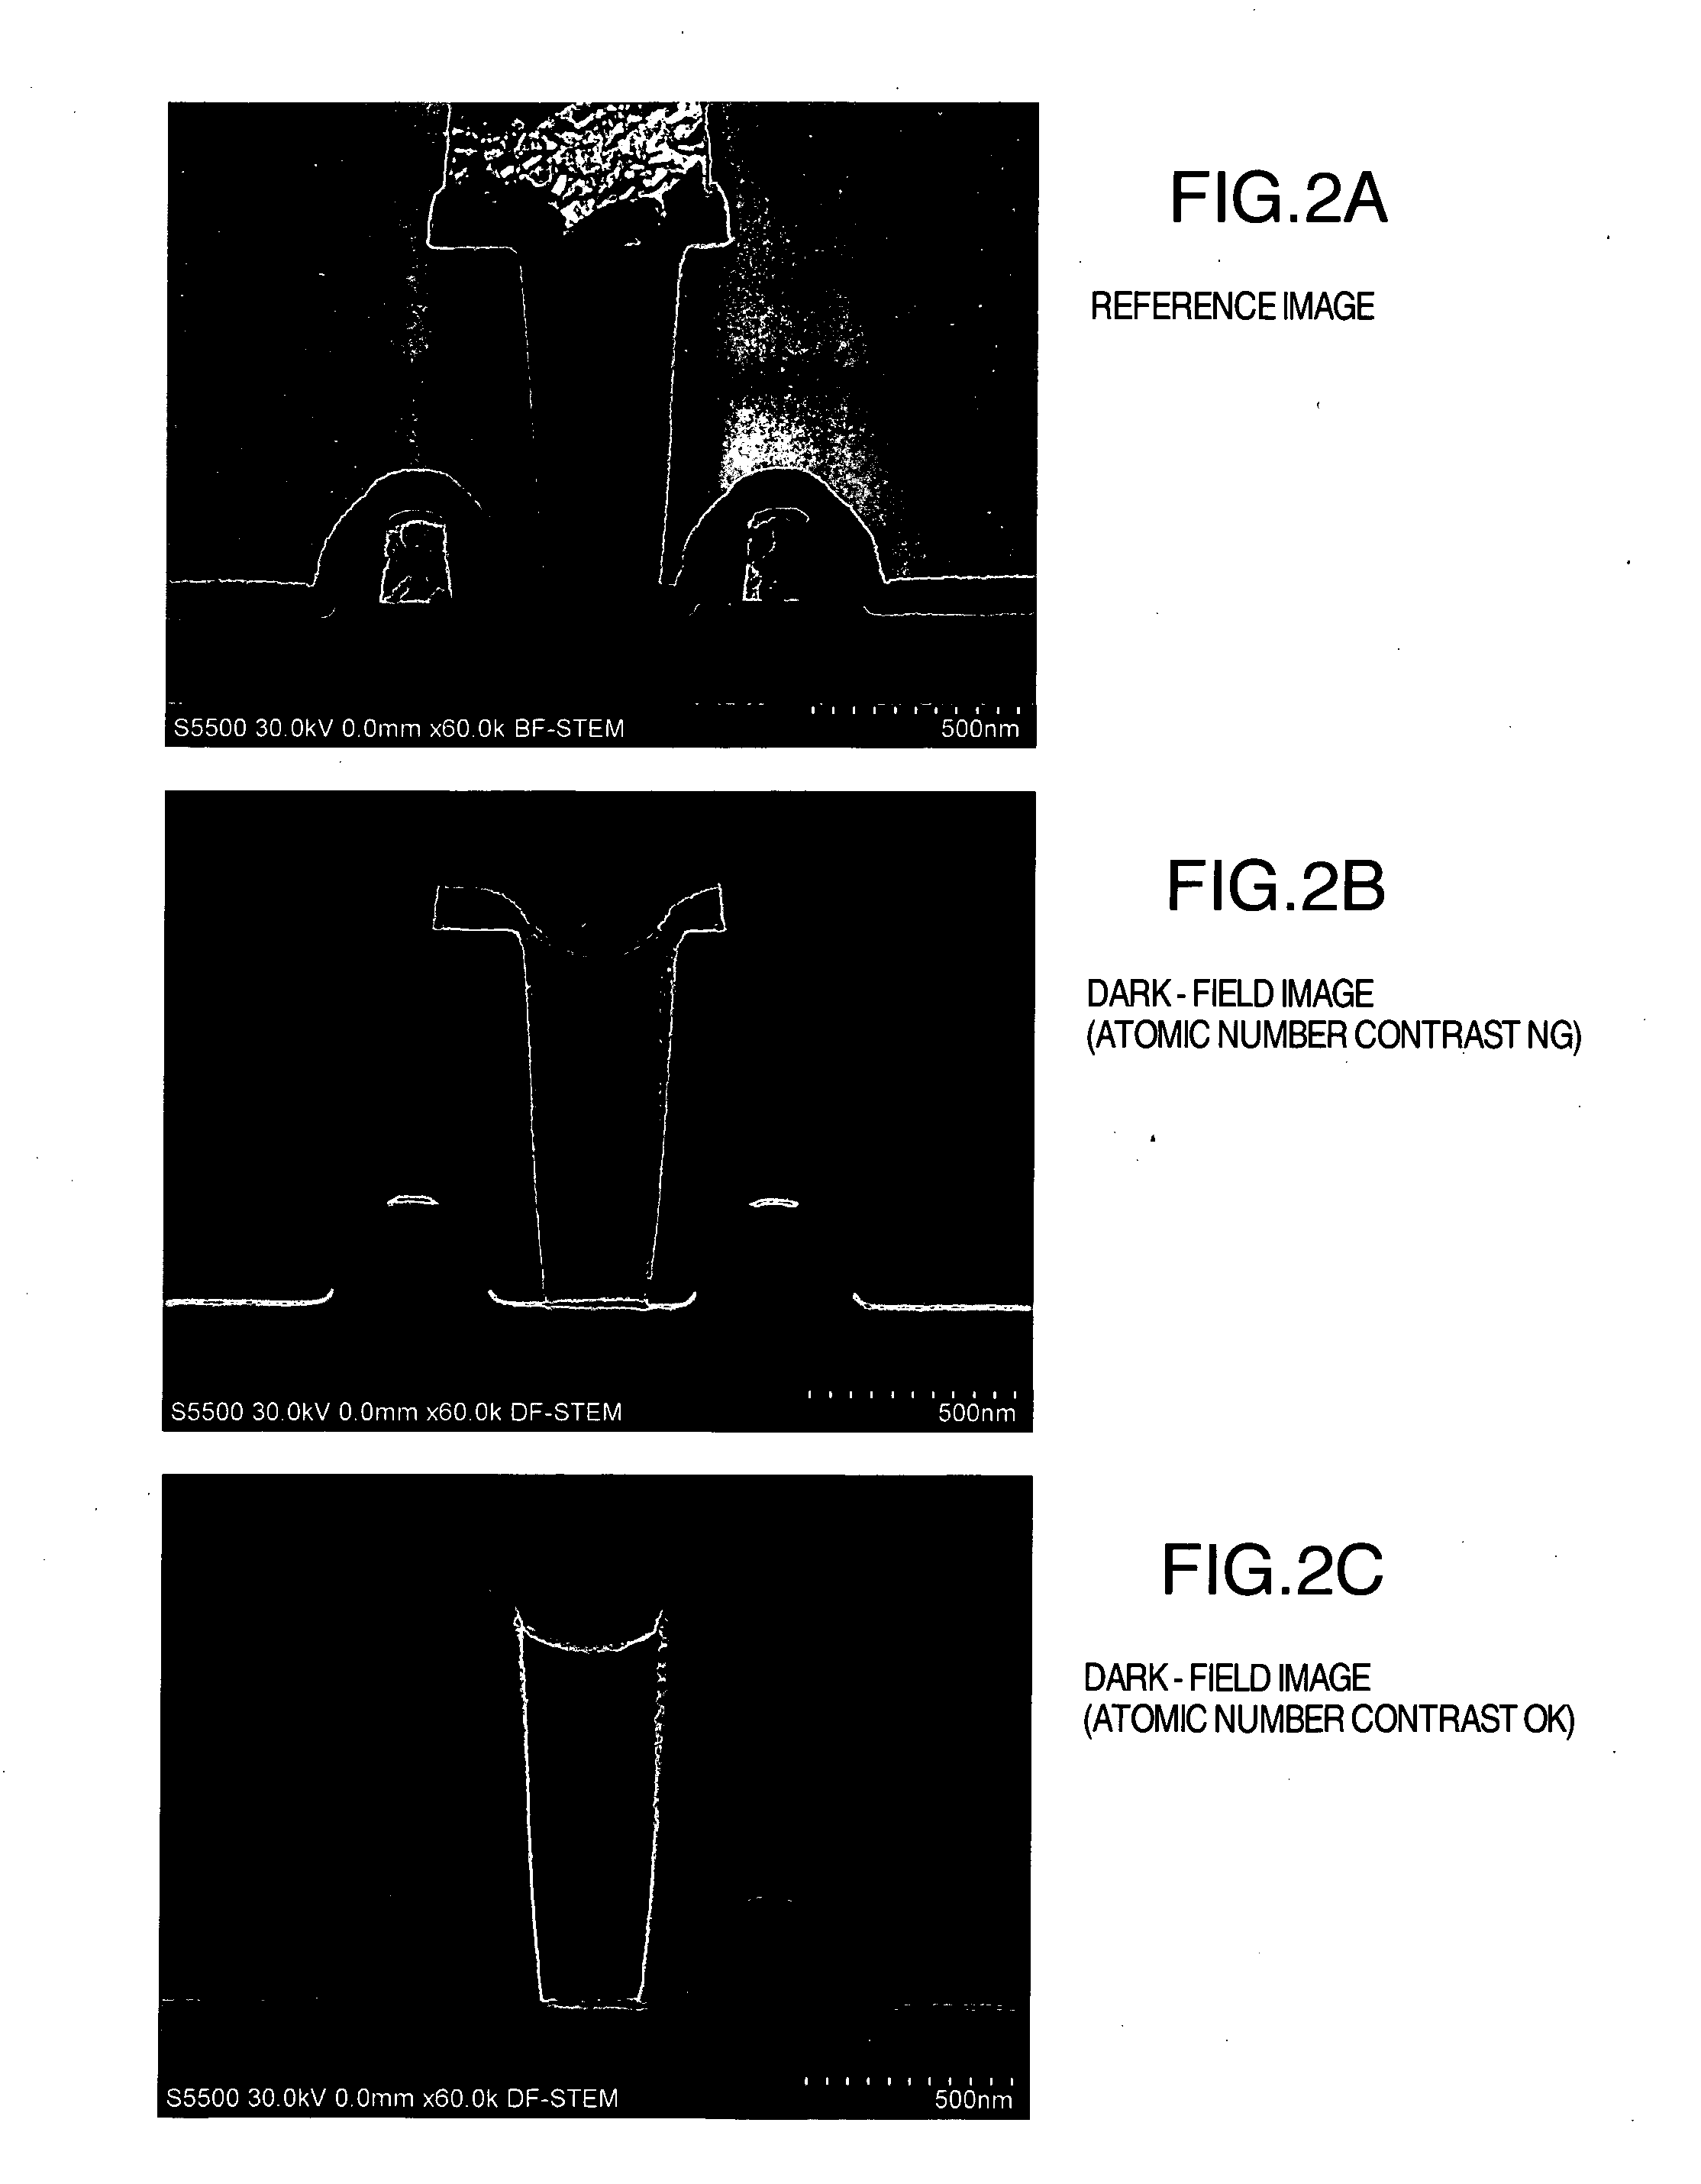 Charged particle beam device with DF-STEM image valuation method